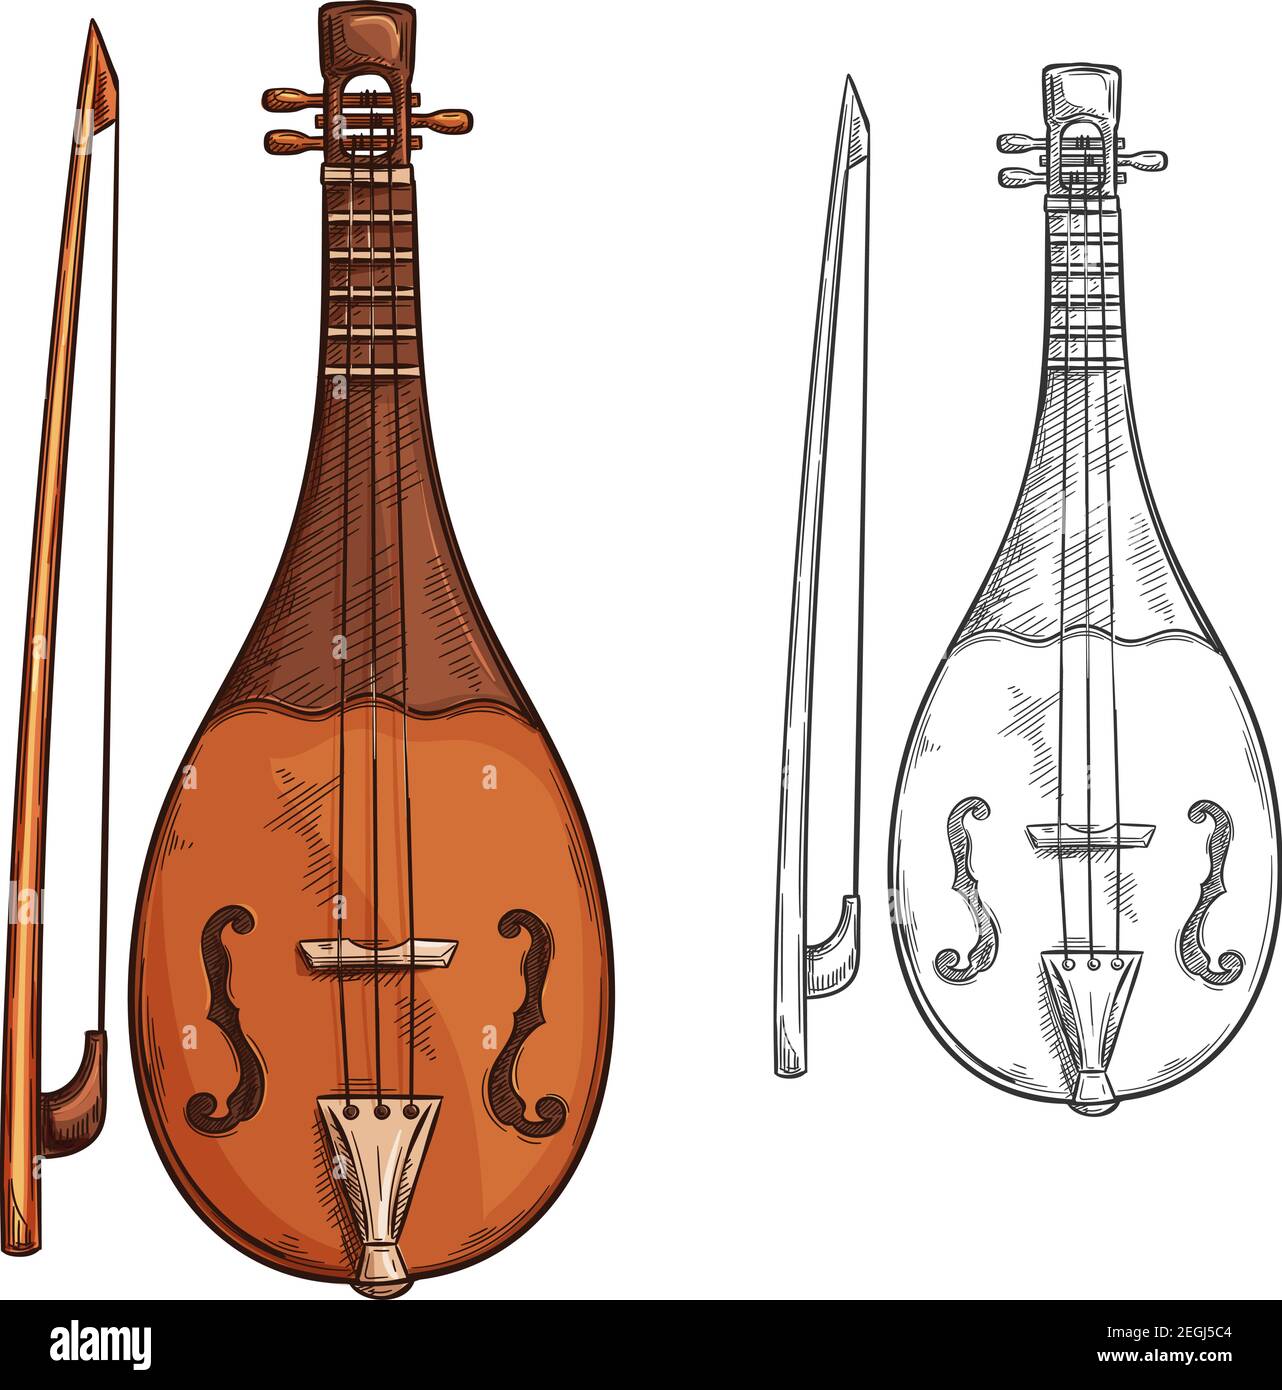 Rebec with bow sketch of medieval musical instrument Bowed stringed